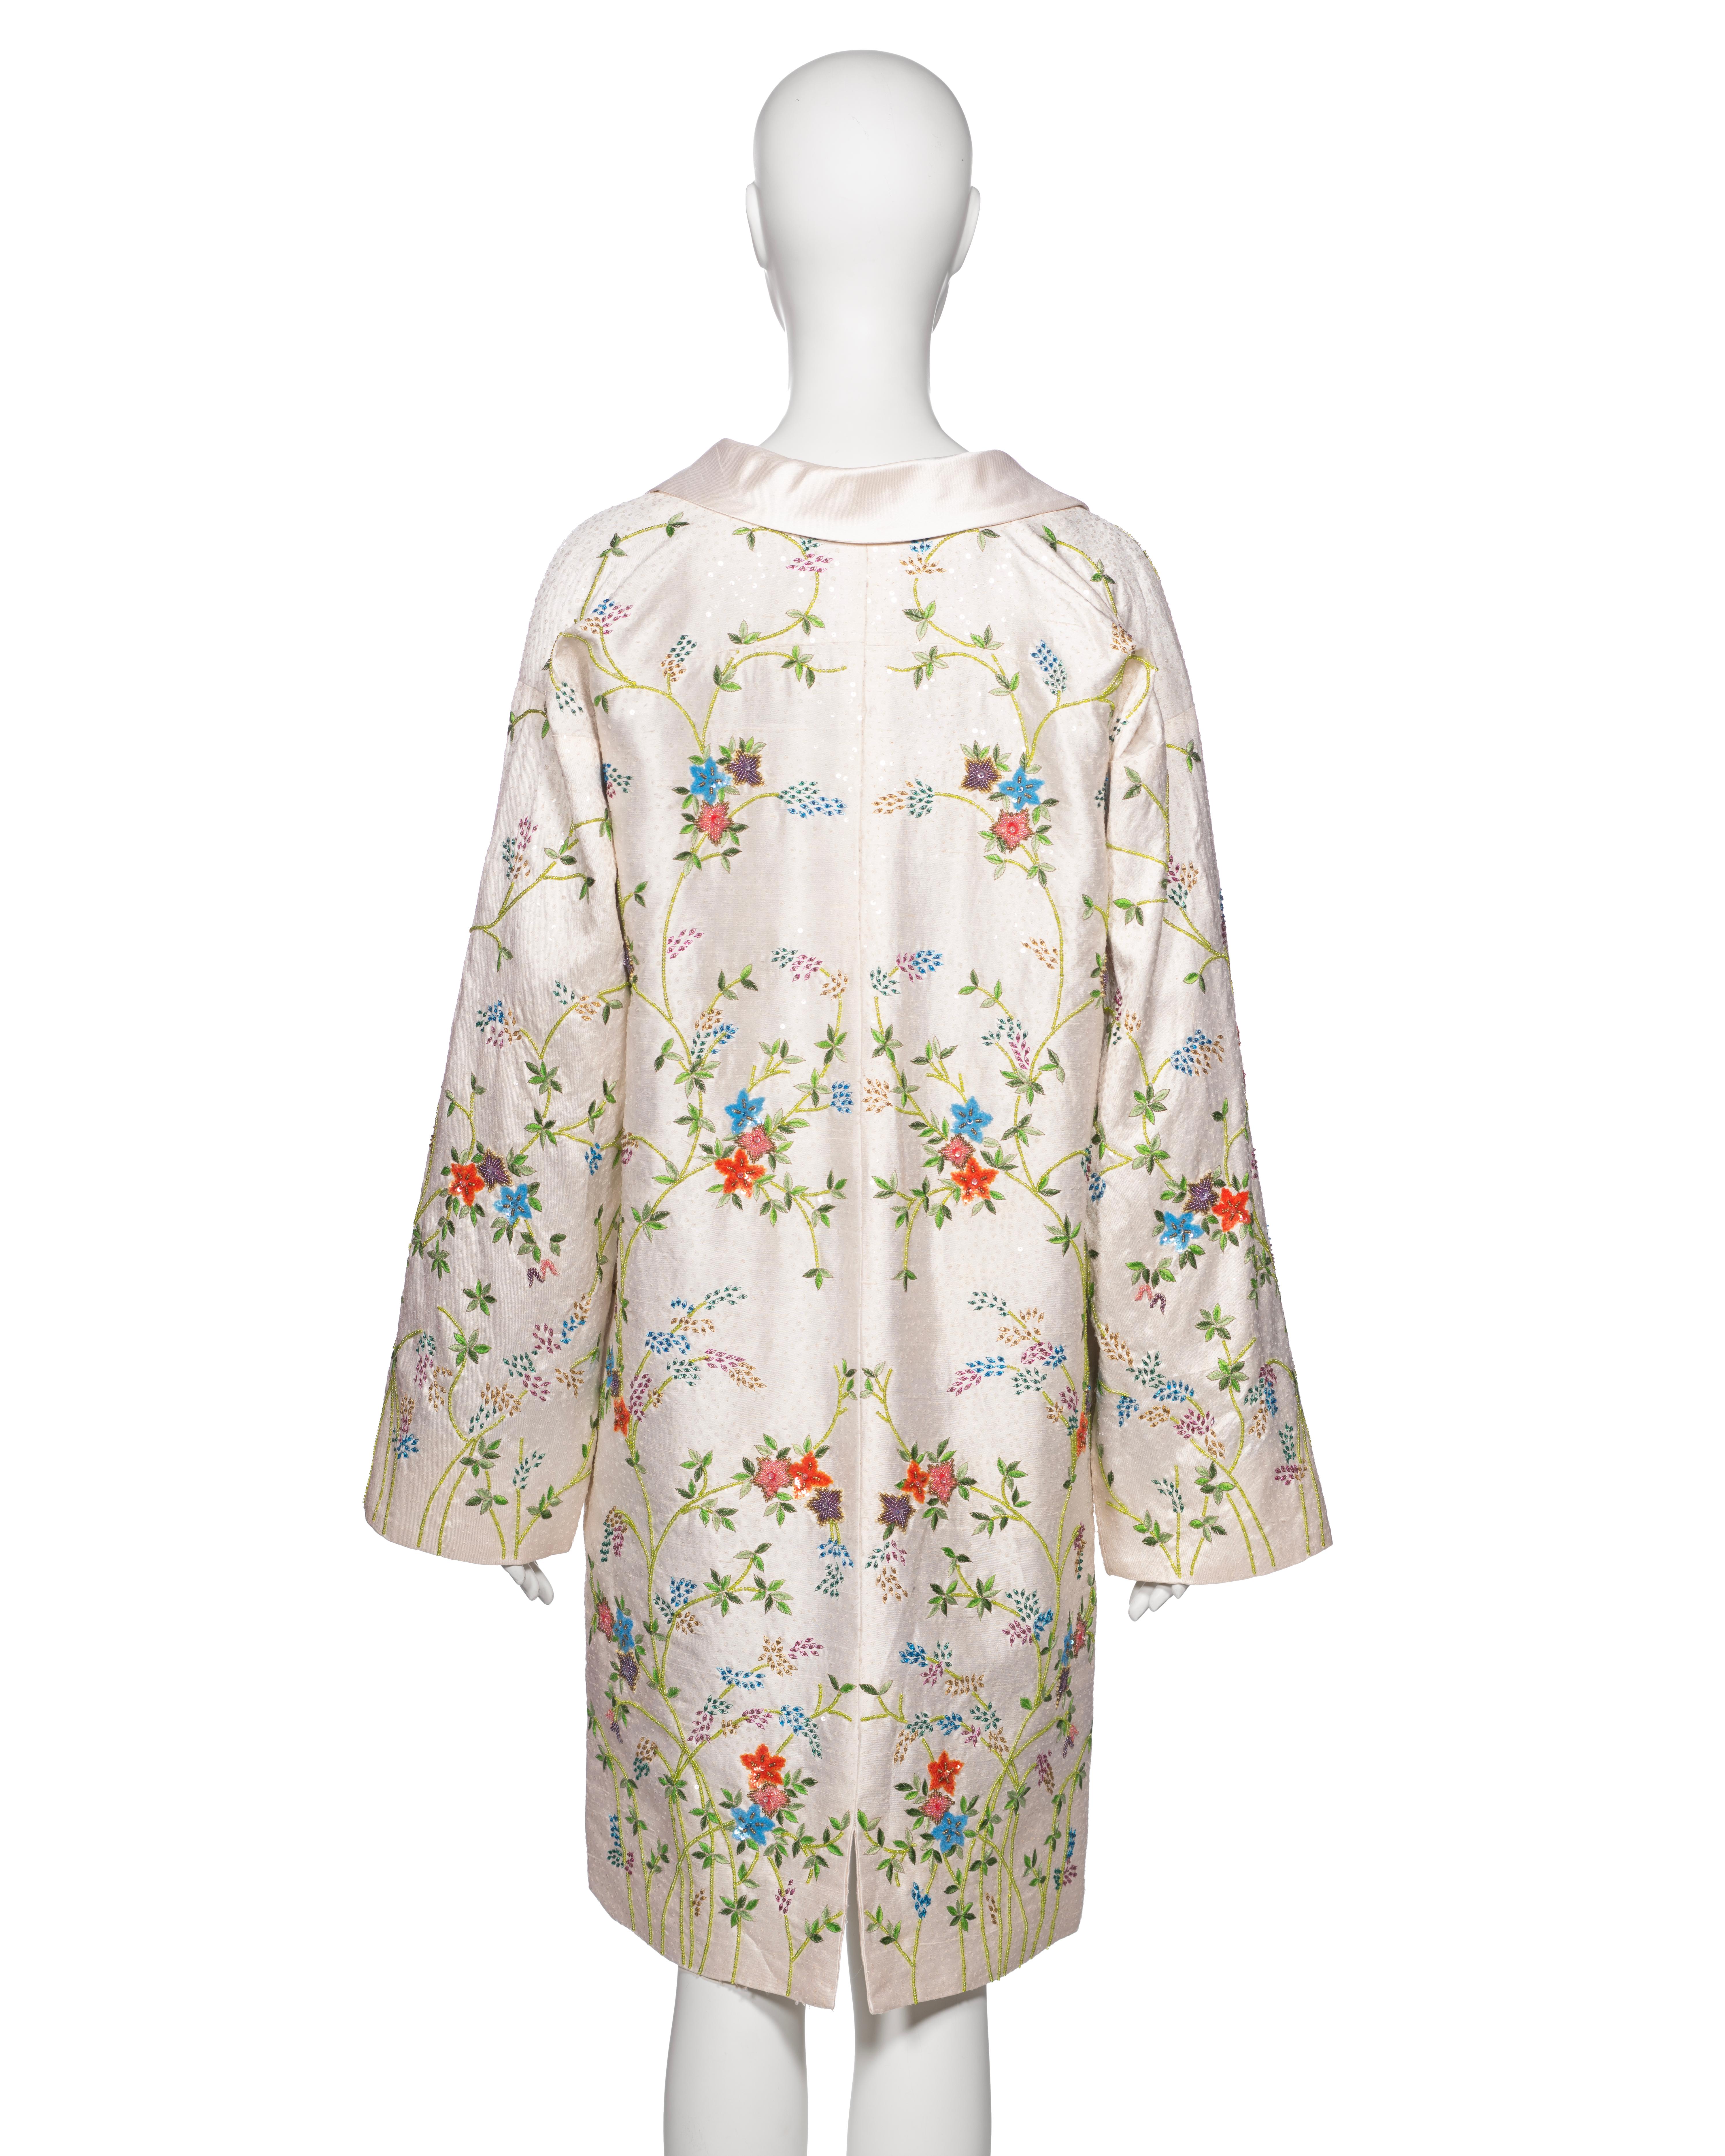 Dolce & Gabbana Hand-Embroidered White Raw Silk Evening Couture Coat, ss 1997 For Sale 8